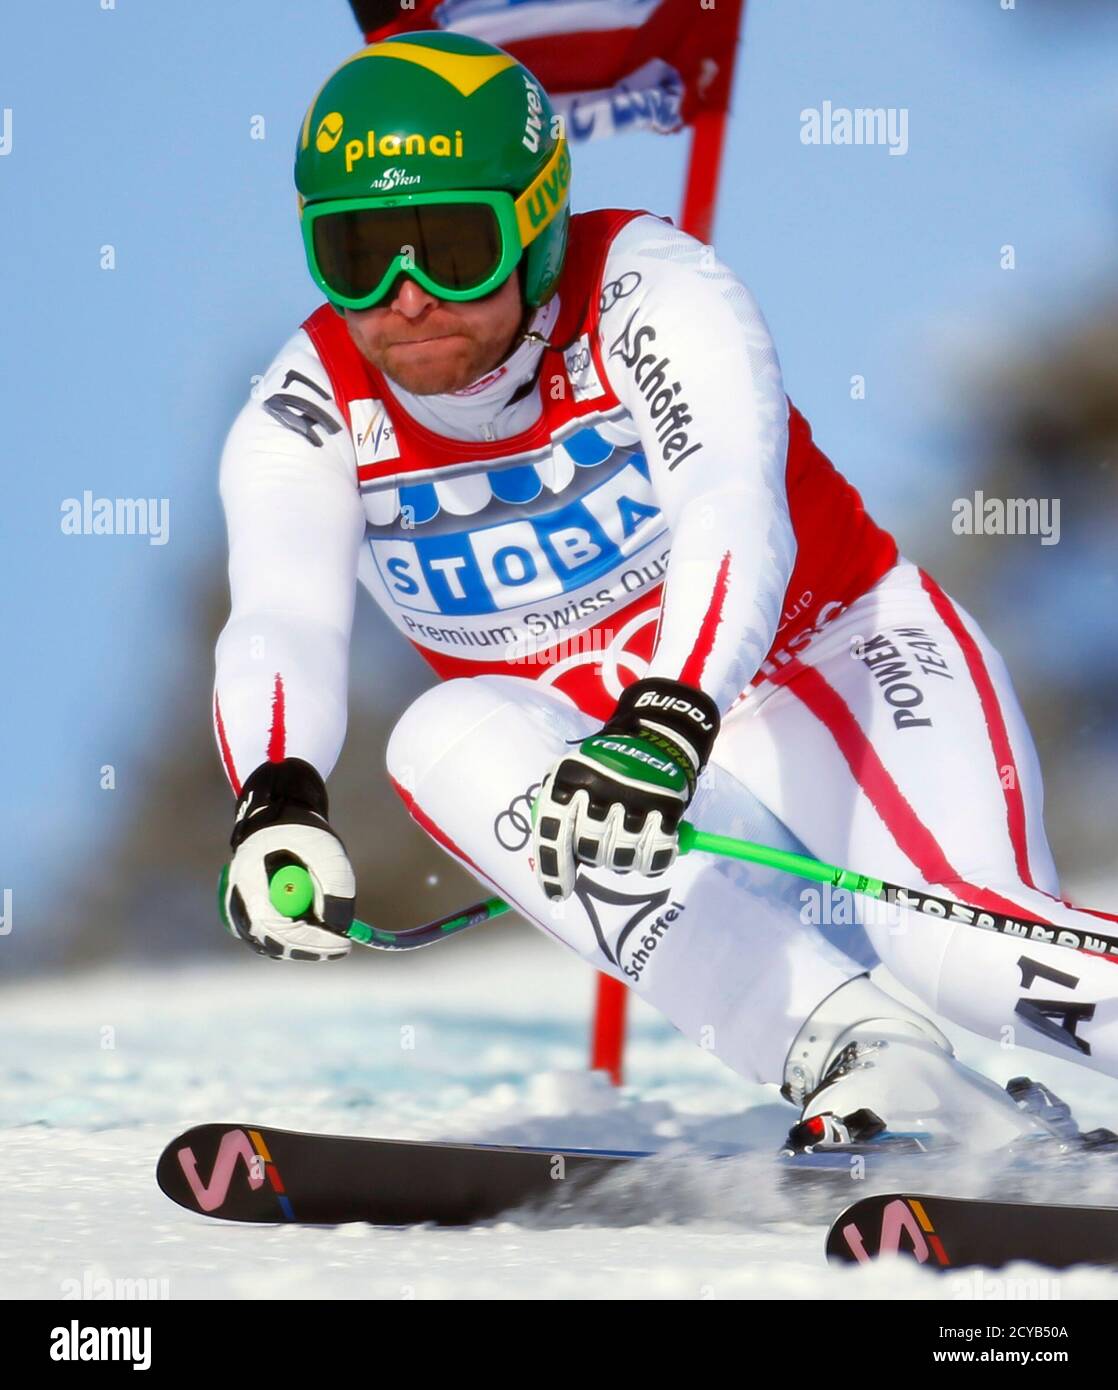 Klaus Kroell of Austria makes a turn during alpine skiing training for the Men's World Cup downhill in Lake Louise, Alberta November 21, 2012.  REUTERS/Mike Blake  (CANADA - Tags: SPORT SKIING) Stock Photo